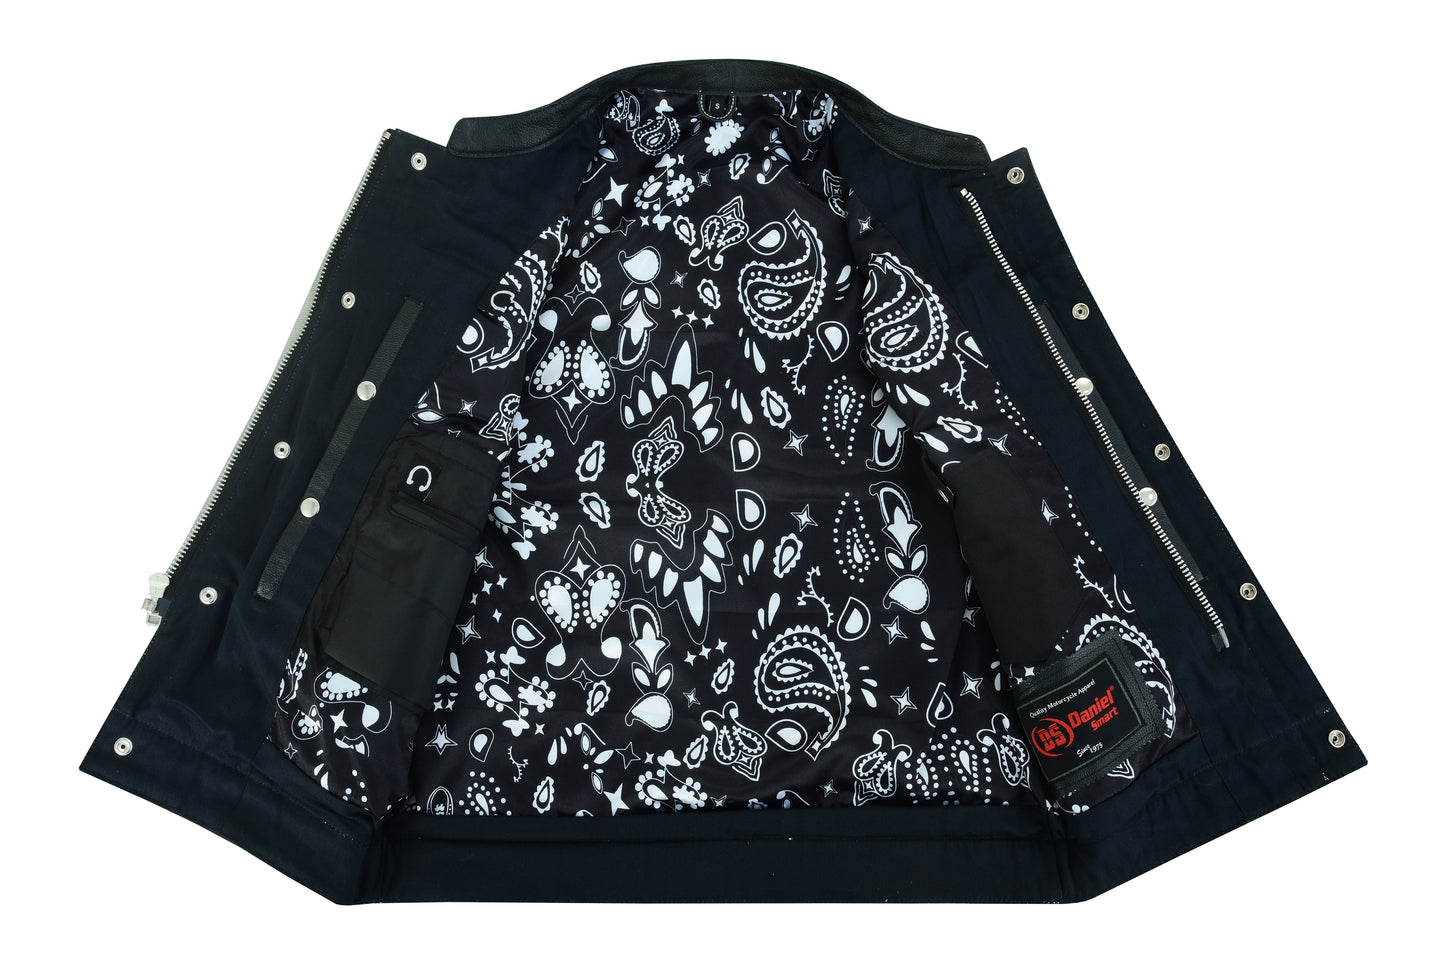 DS164 Men’s Paisley Black Leather Motorcycle Vest with White Stitching